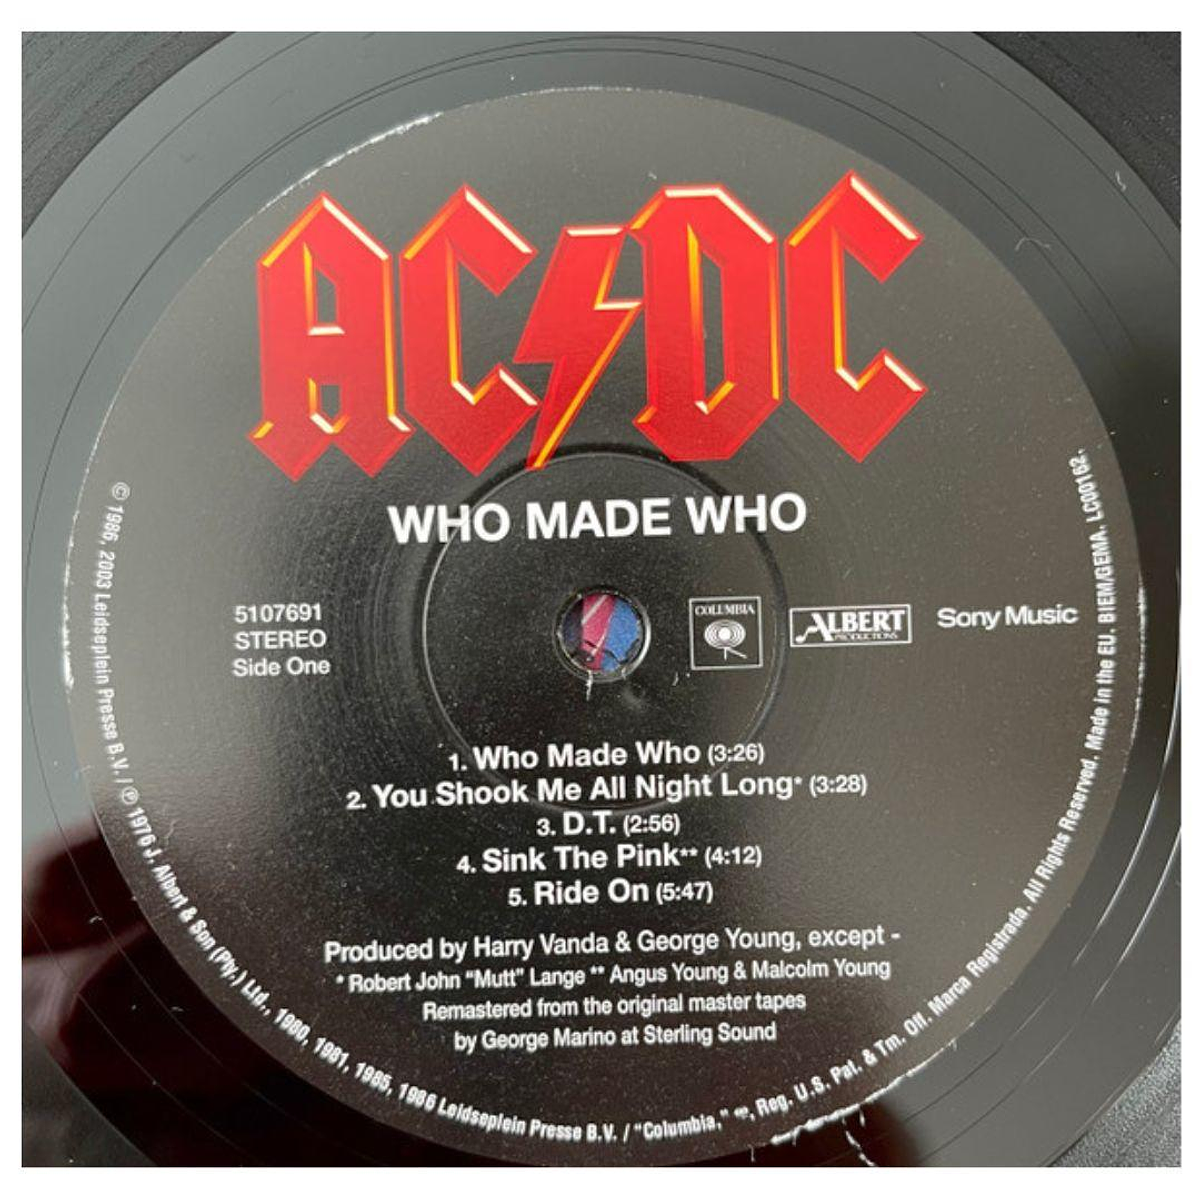 ACDC - WHO MADE WHO VINILO